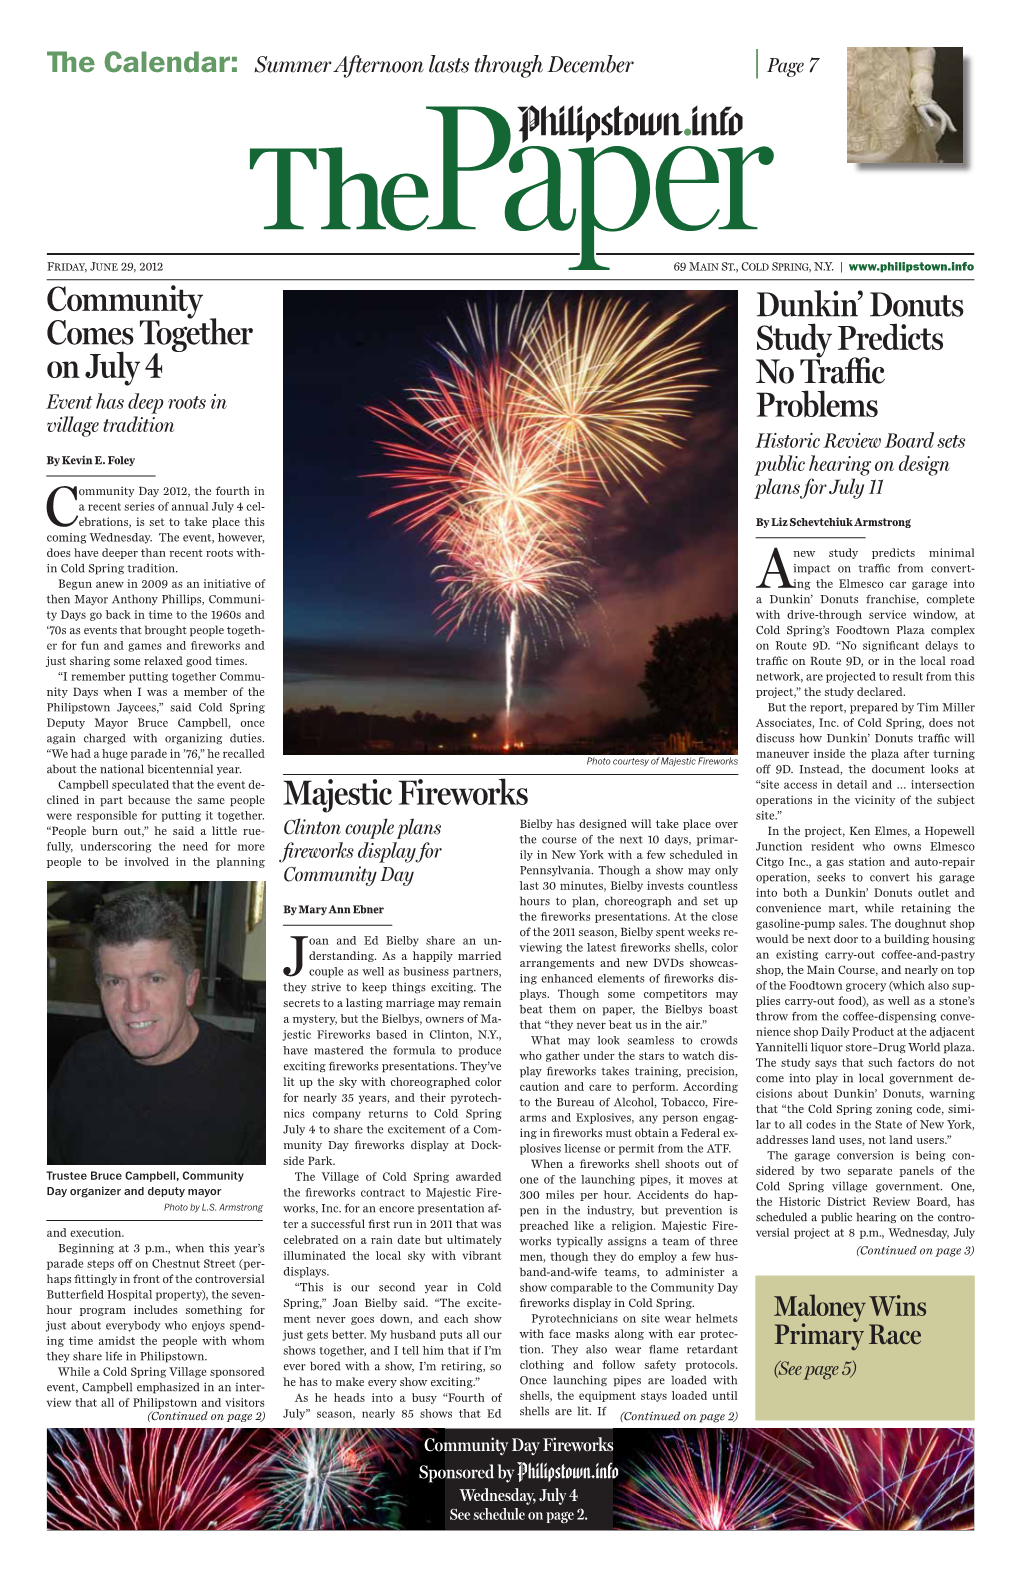 Majestic Fireworks Community Comes Together on July 4 Dunkin' Donuts